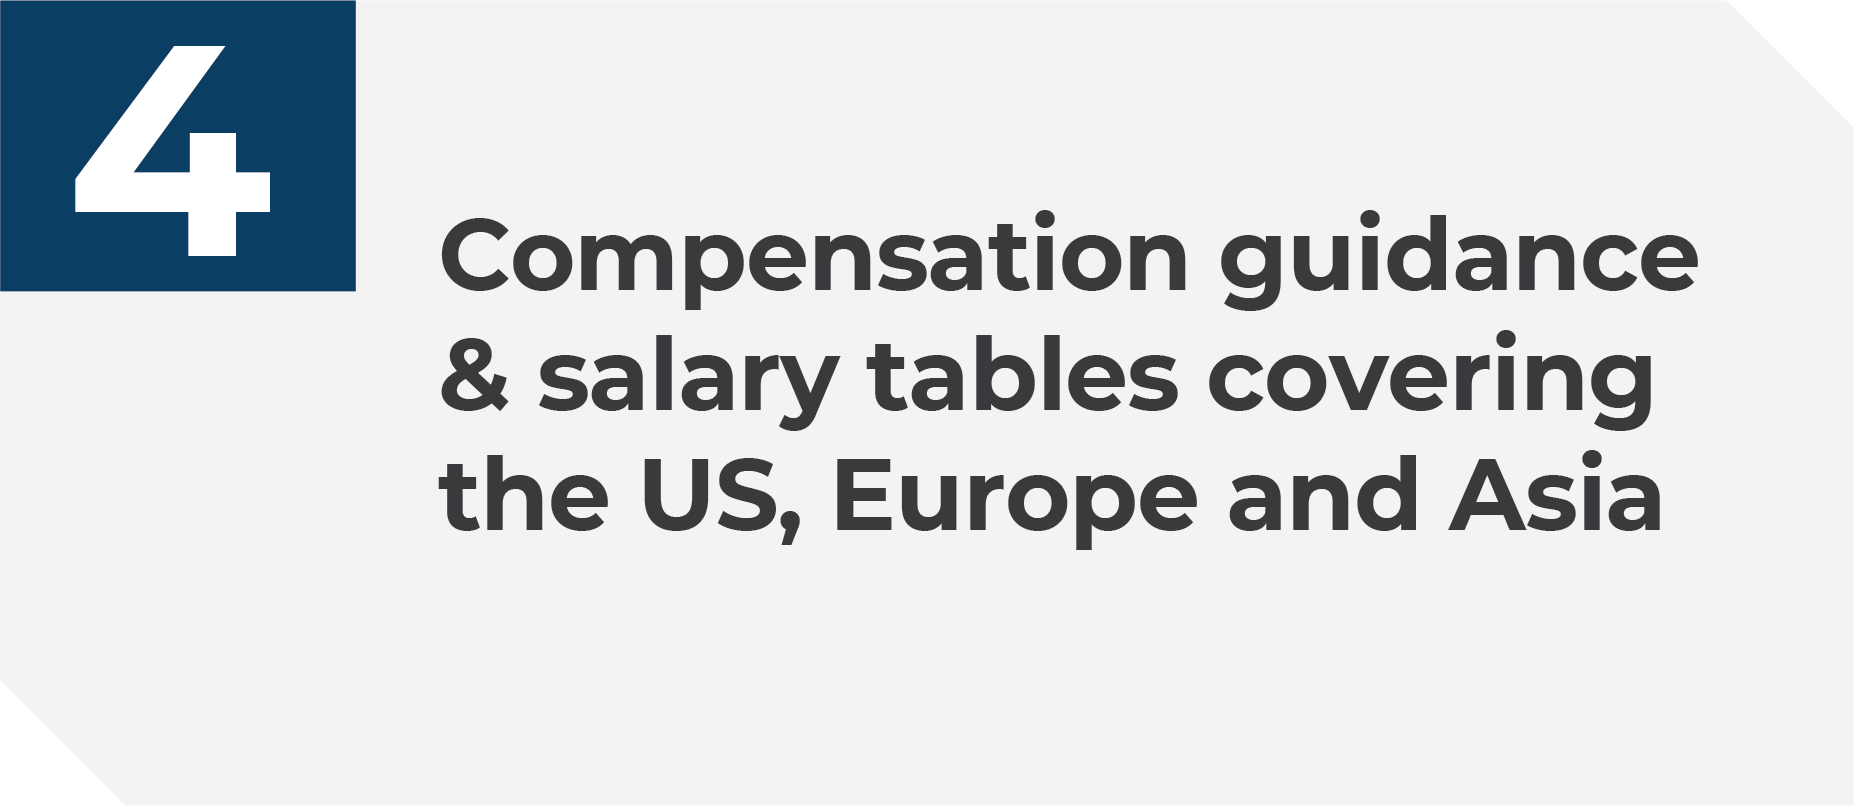 Compensation guidance & salary tables covering the US, Europe and Asia Pacific